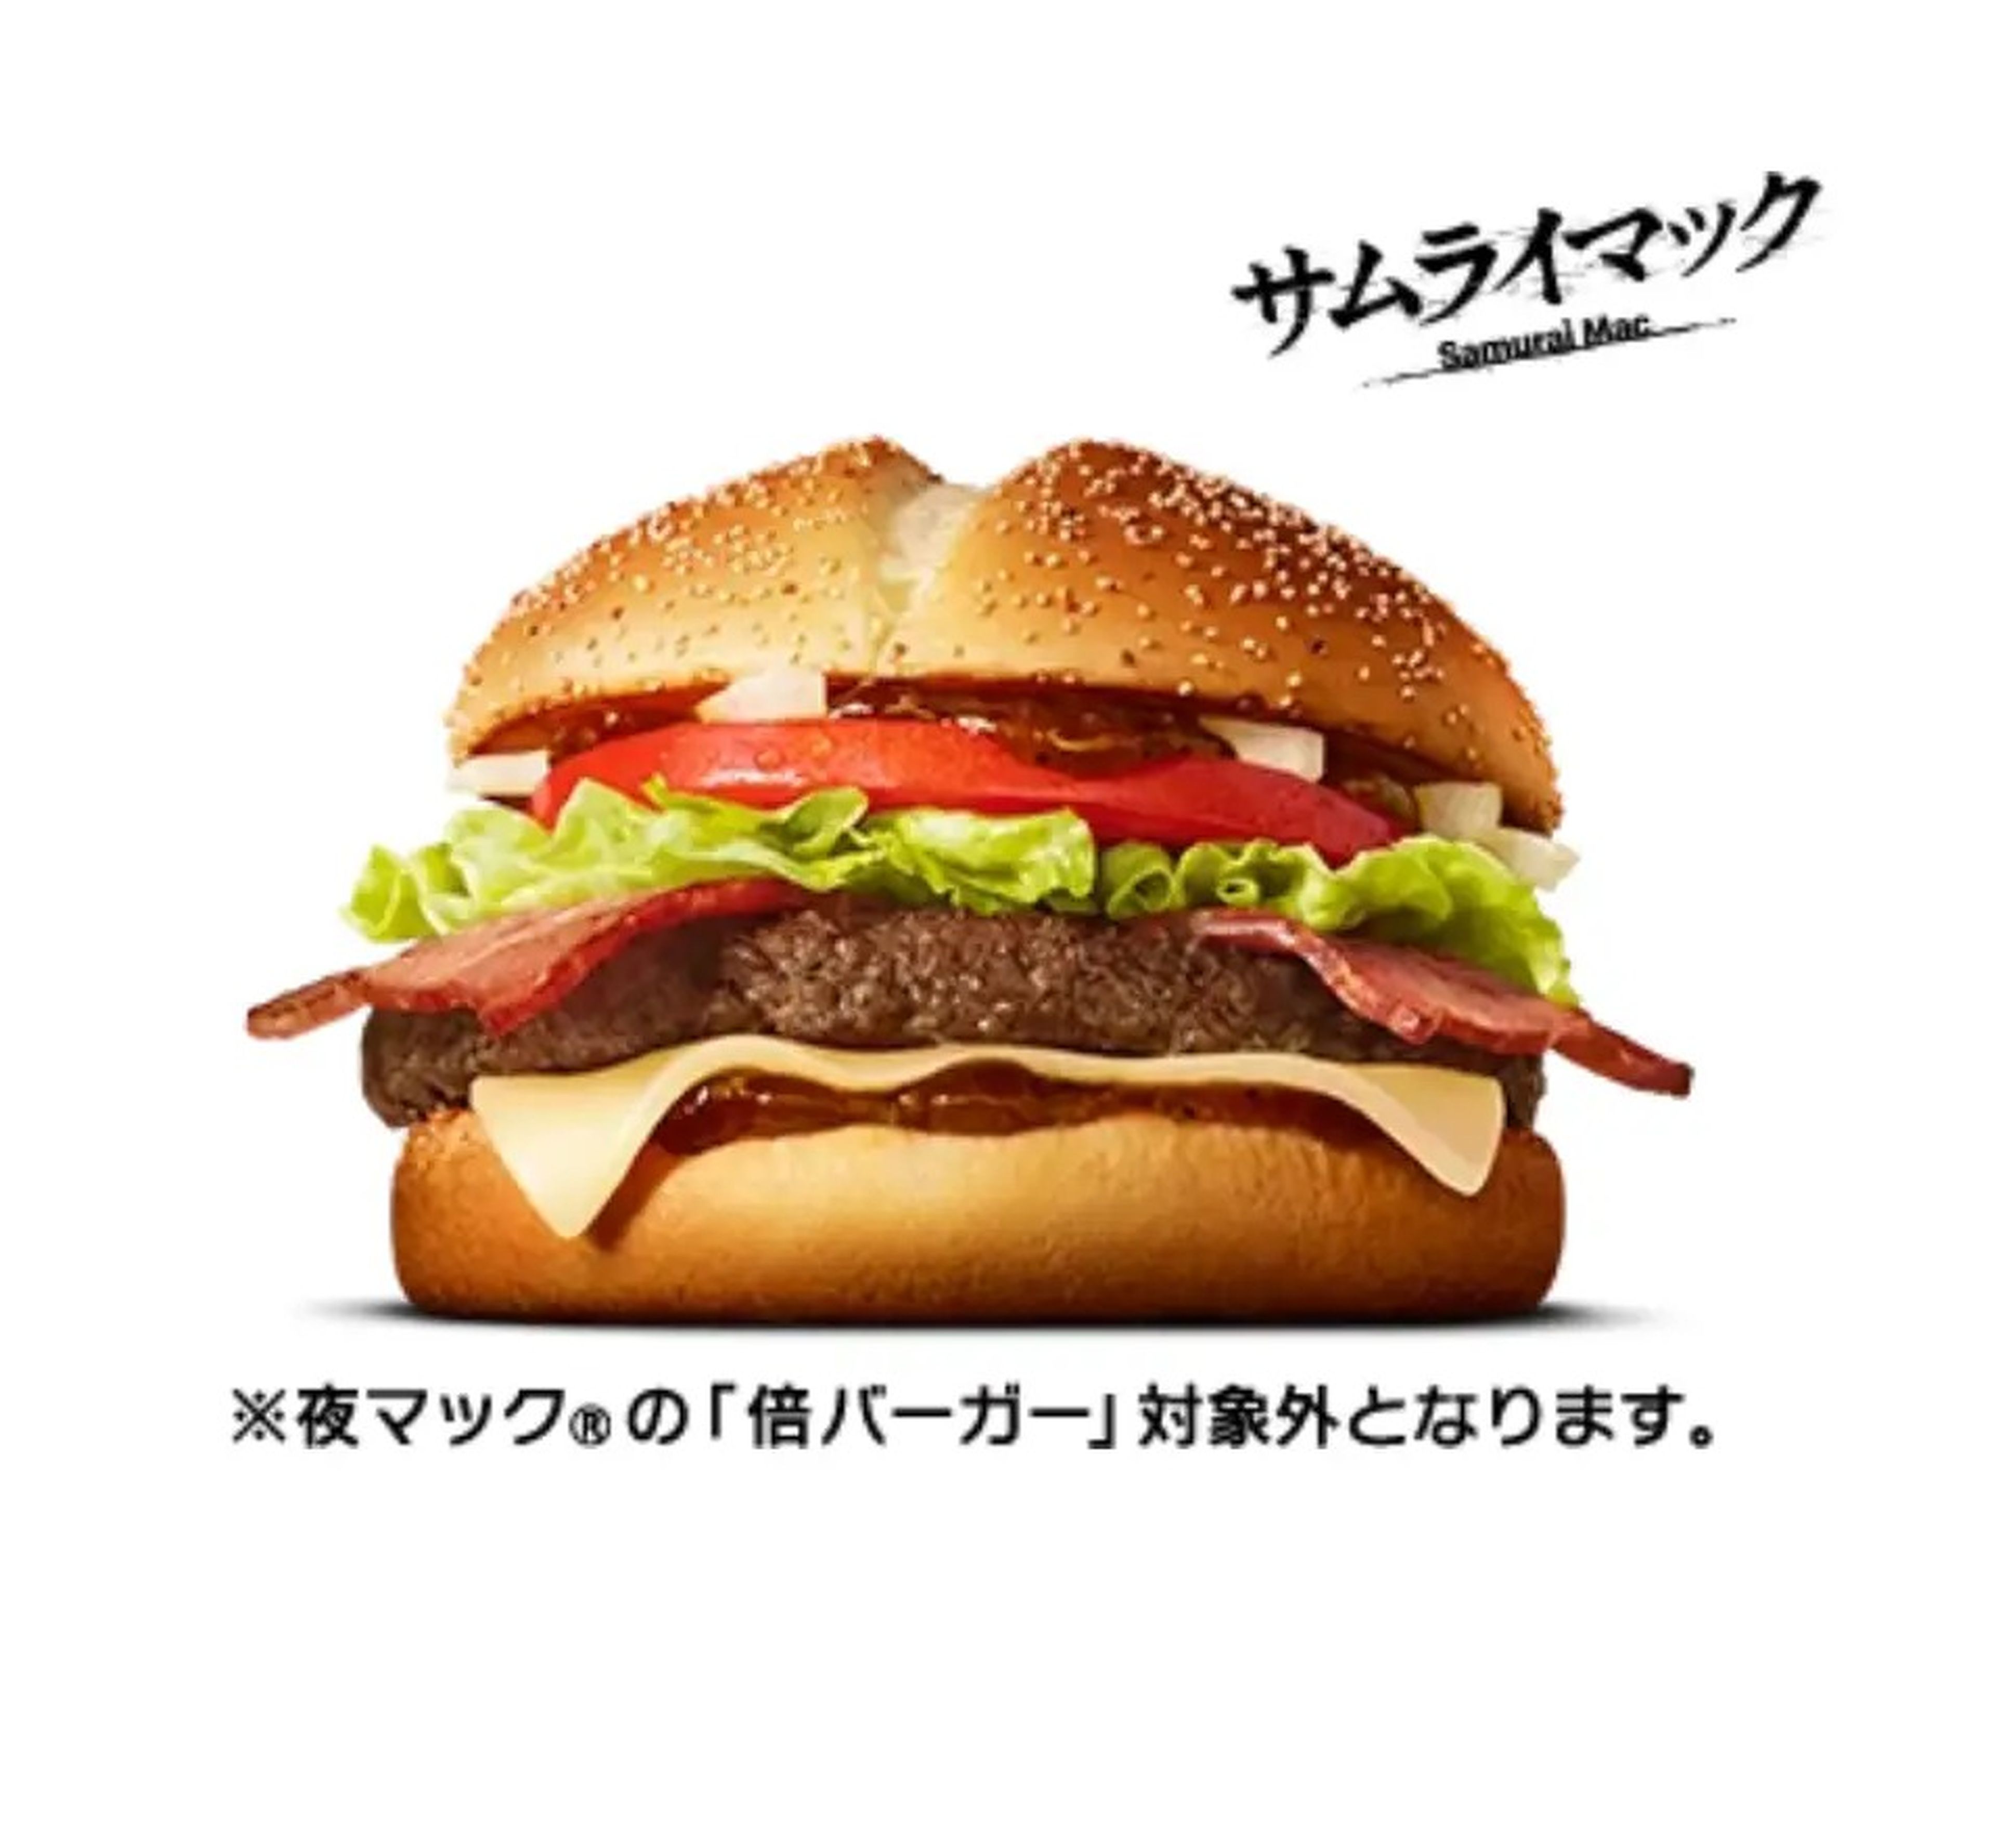 Japan: Roasted Soy Sauce Bacon Tomato Thick Beef